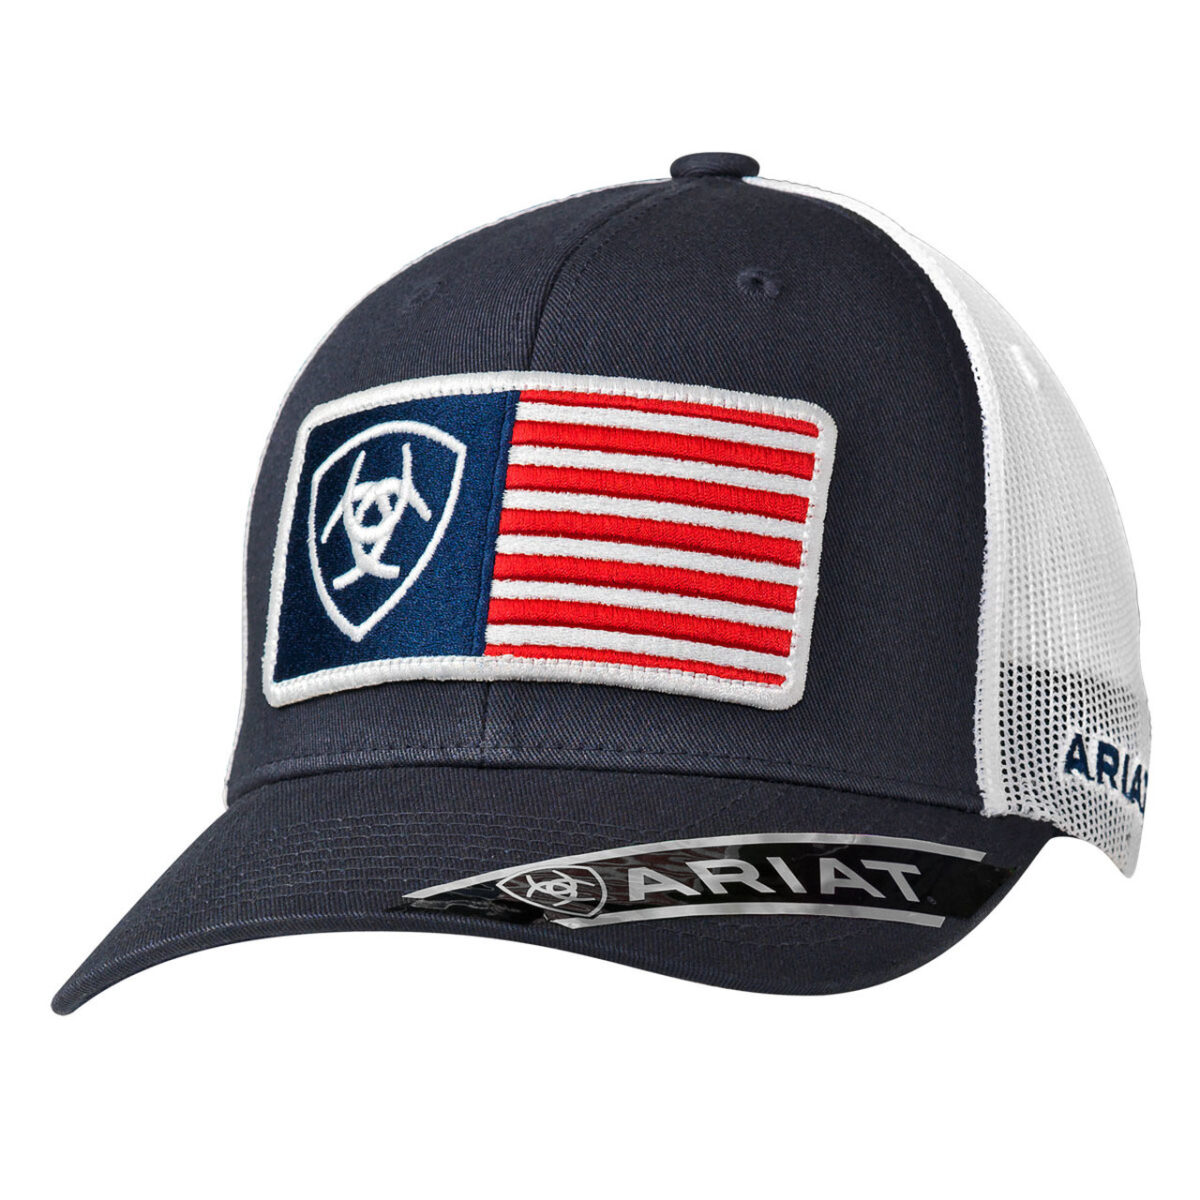 Navy Blue Baseball Snapback Caps With Embriodey 1